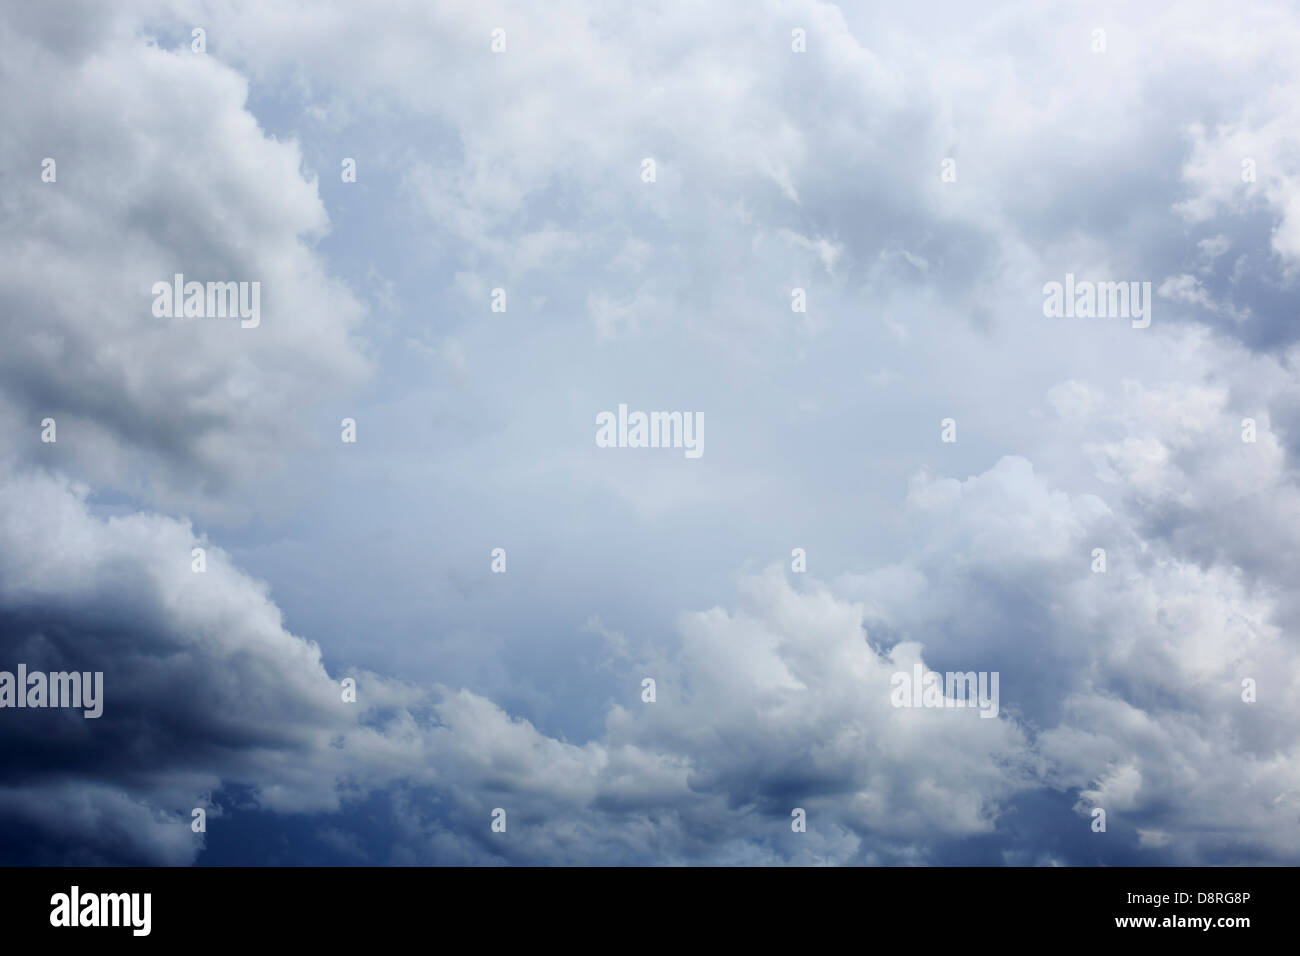 Summer storm clouds forming up overhead - Midwest United States. Stock Photo